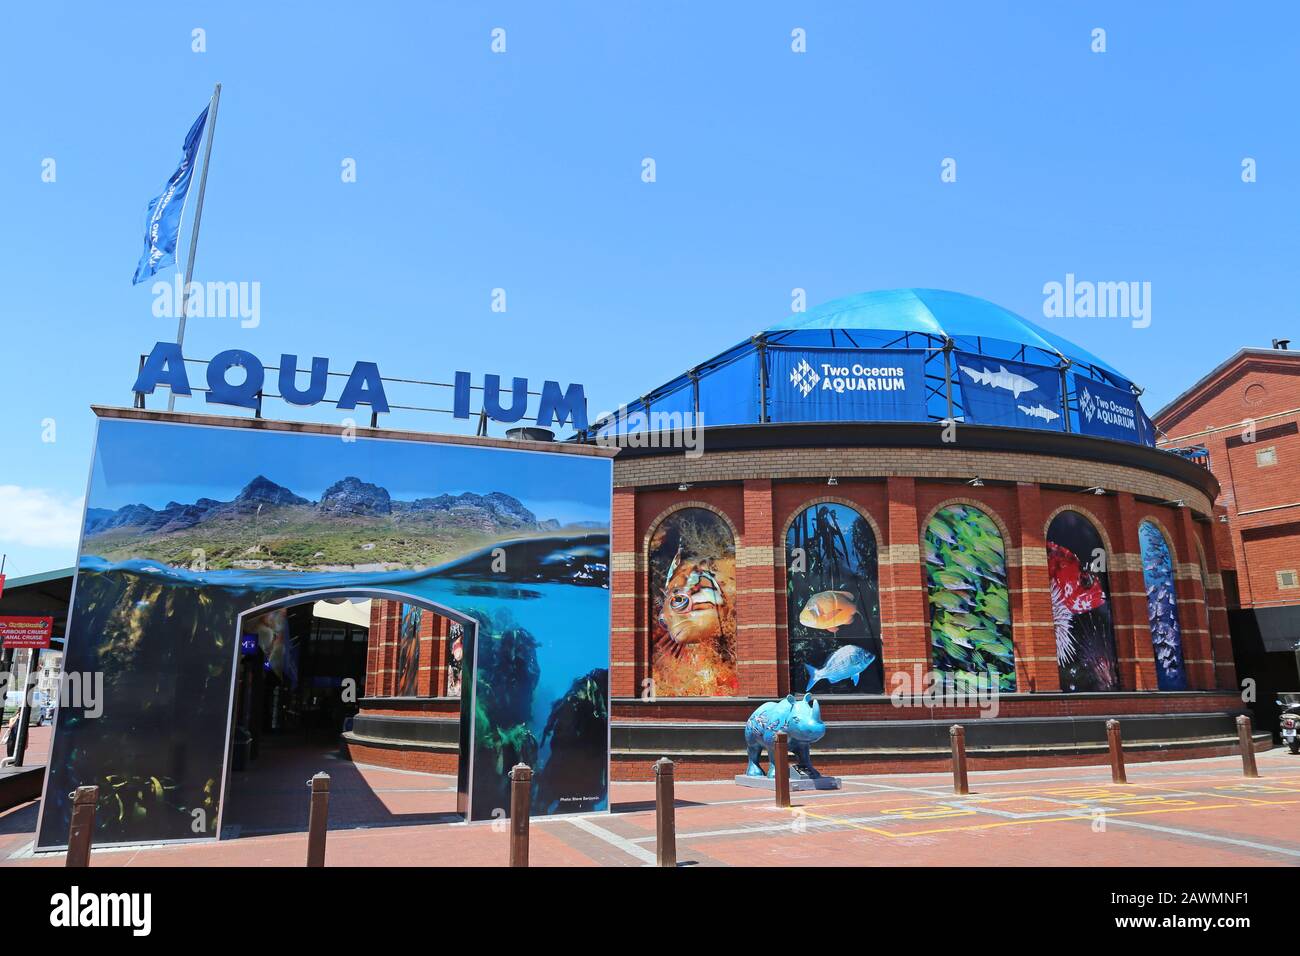 Two Oceans Aquarium, Marina, V&A (Victoria and Alfred) Waterfront, Cape Town, Table Bay, Western Cape Province, South Africa, Africa Stock Photo